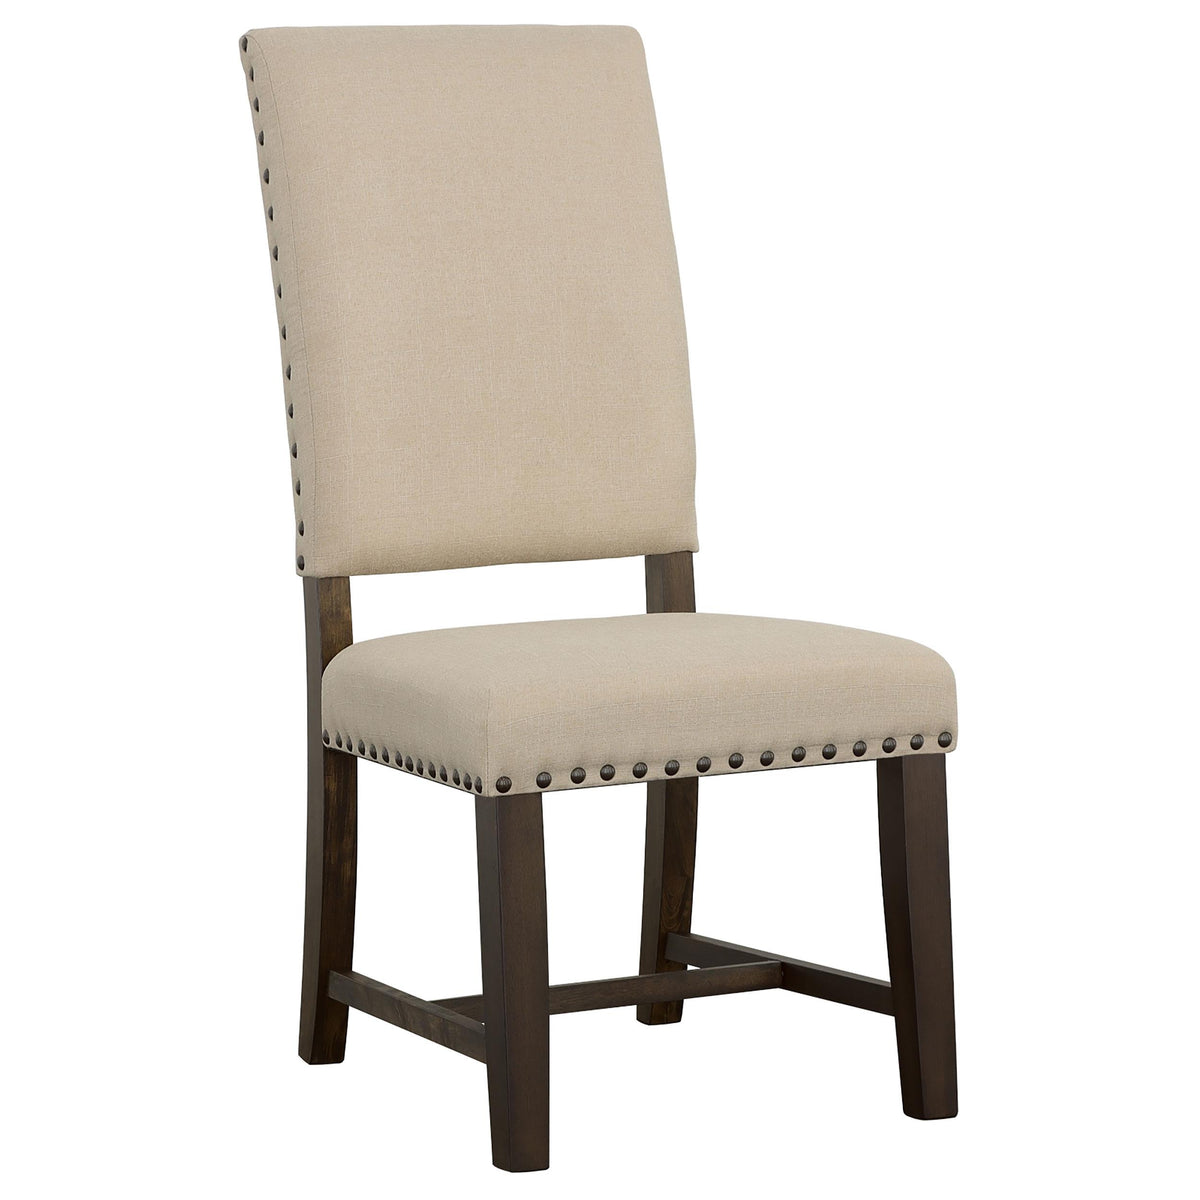 Twain Upholstered Side Chairs Beige (Set of 2) Twain Upholstered Side Chairs Beige (Set of 2) Half Price Furniture